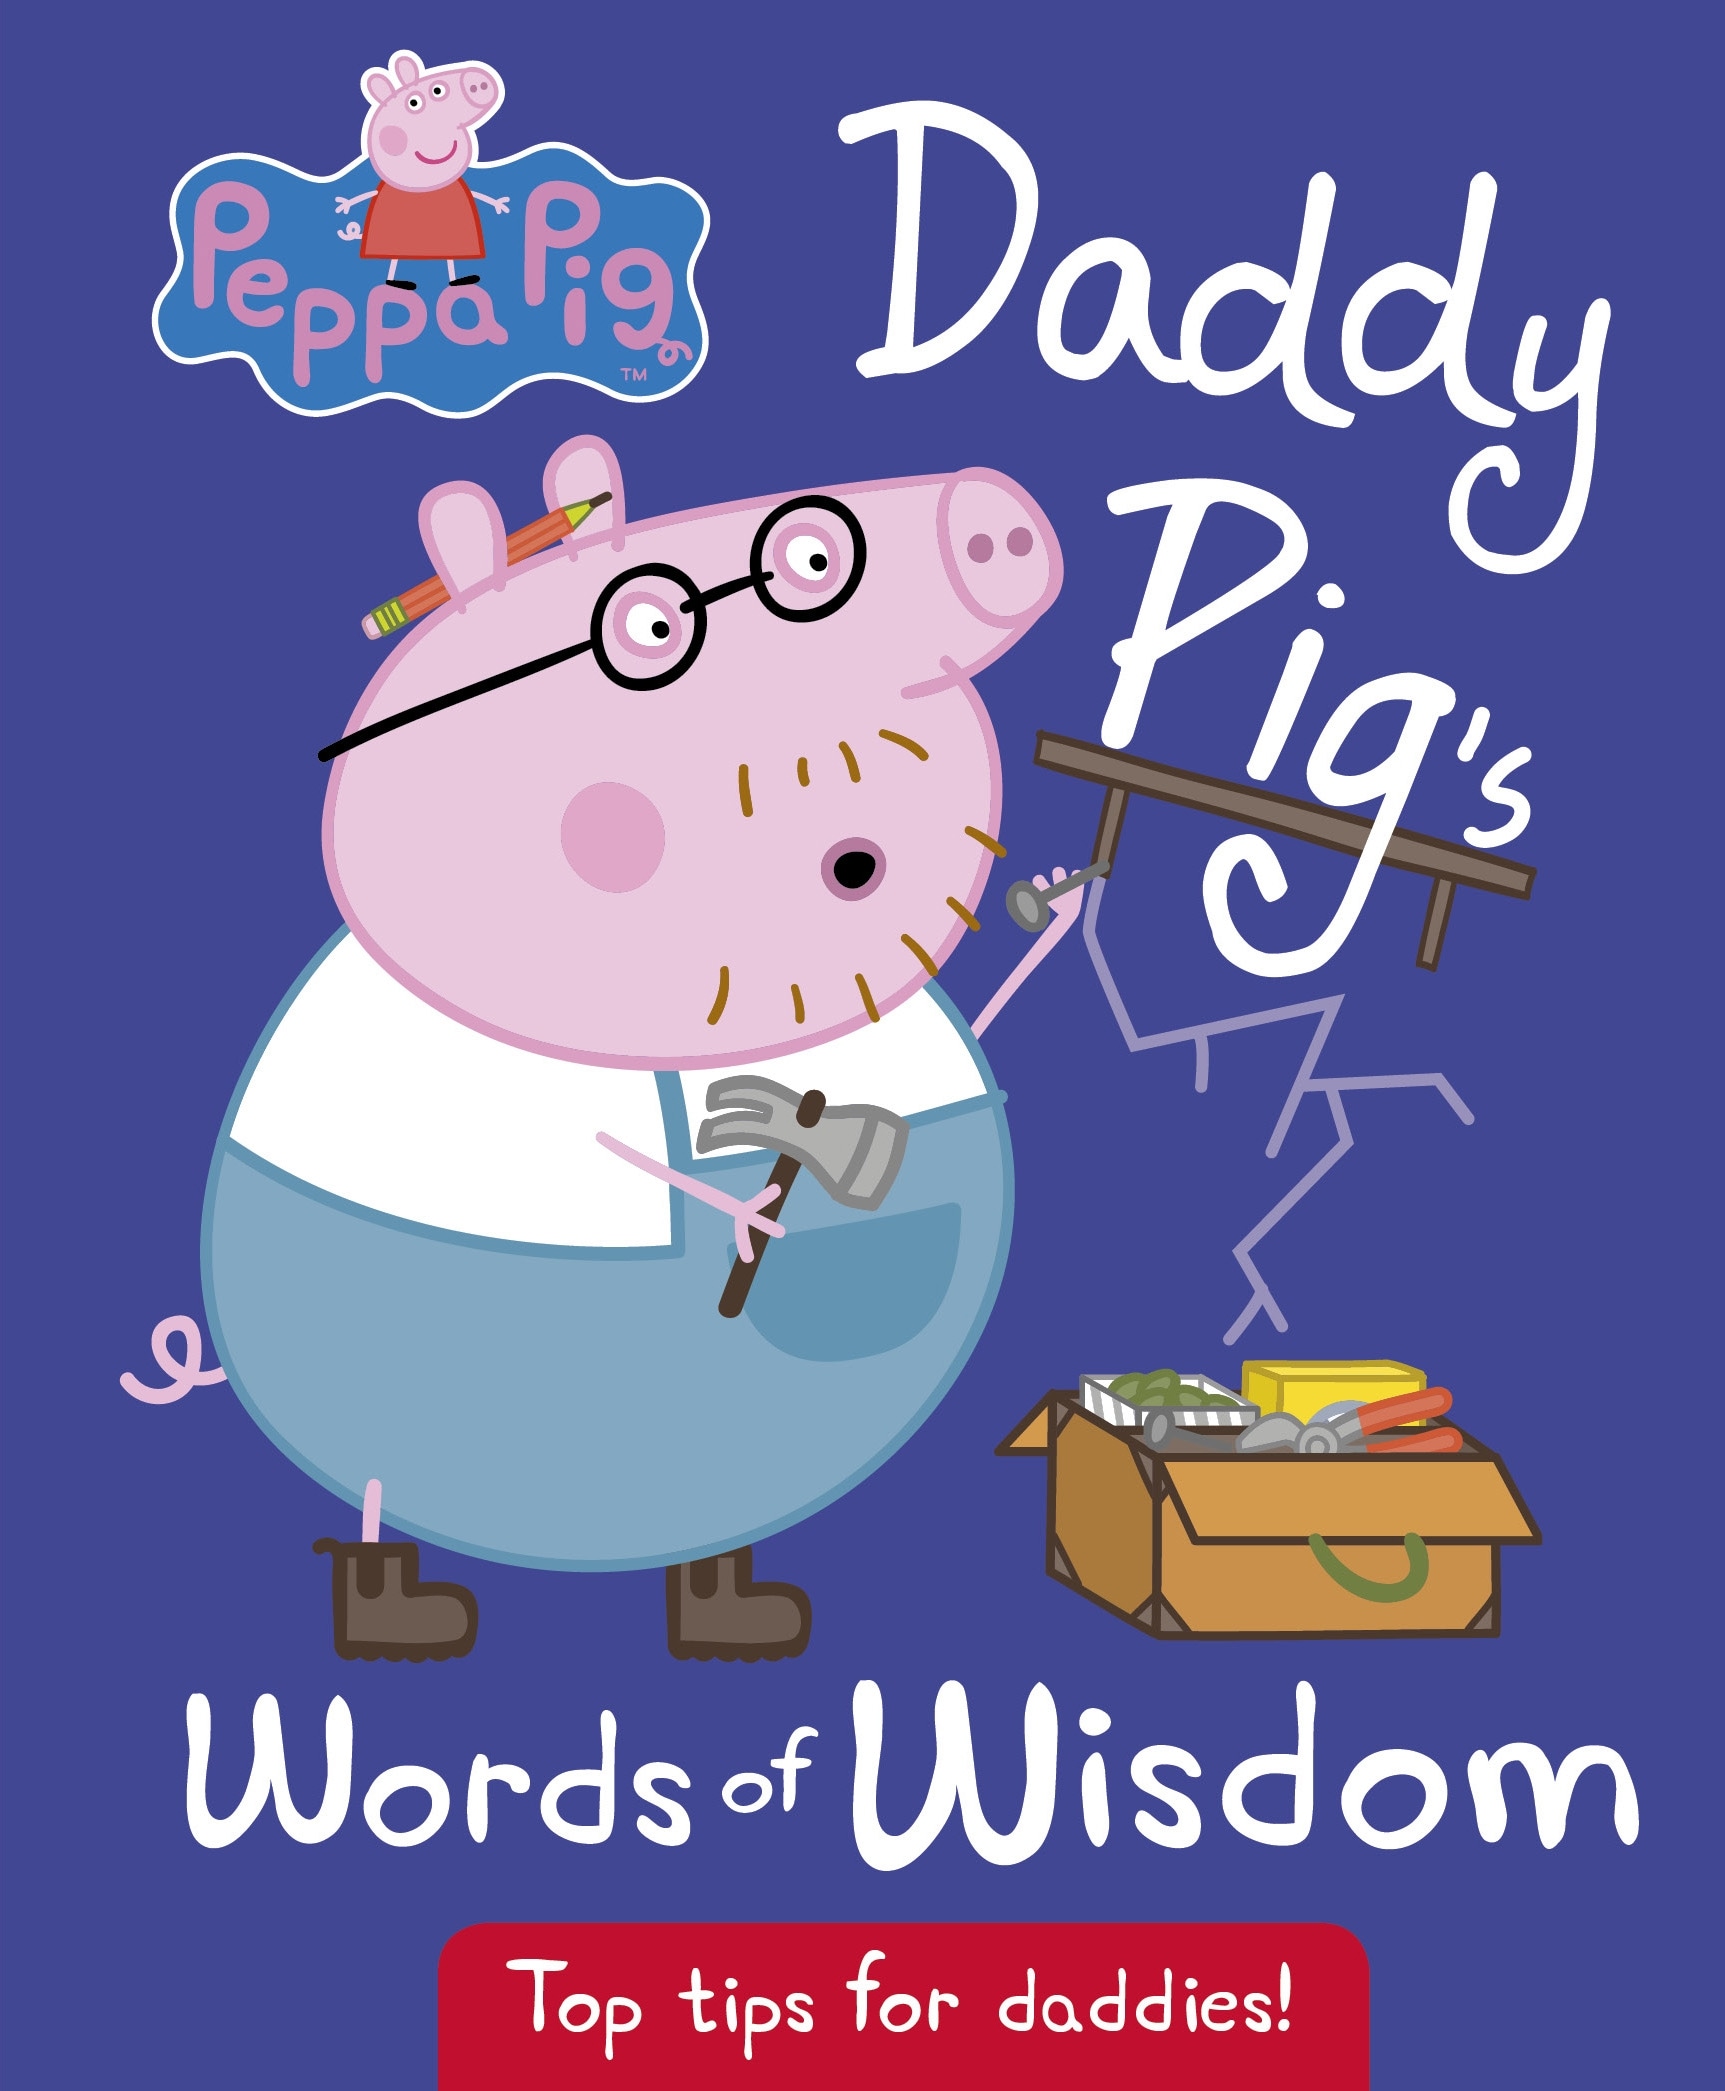 Book “Peppa Pig: Daddy Pig's Words of Wisdom” by Peppa Pig — May 5, 2016